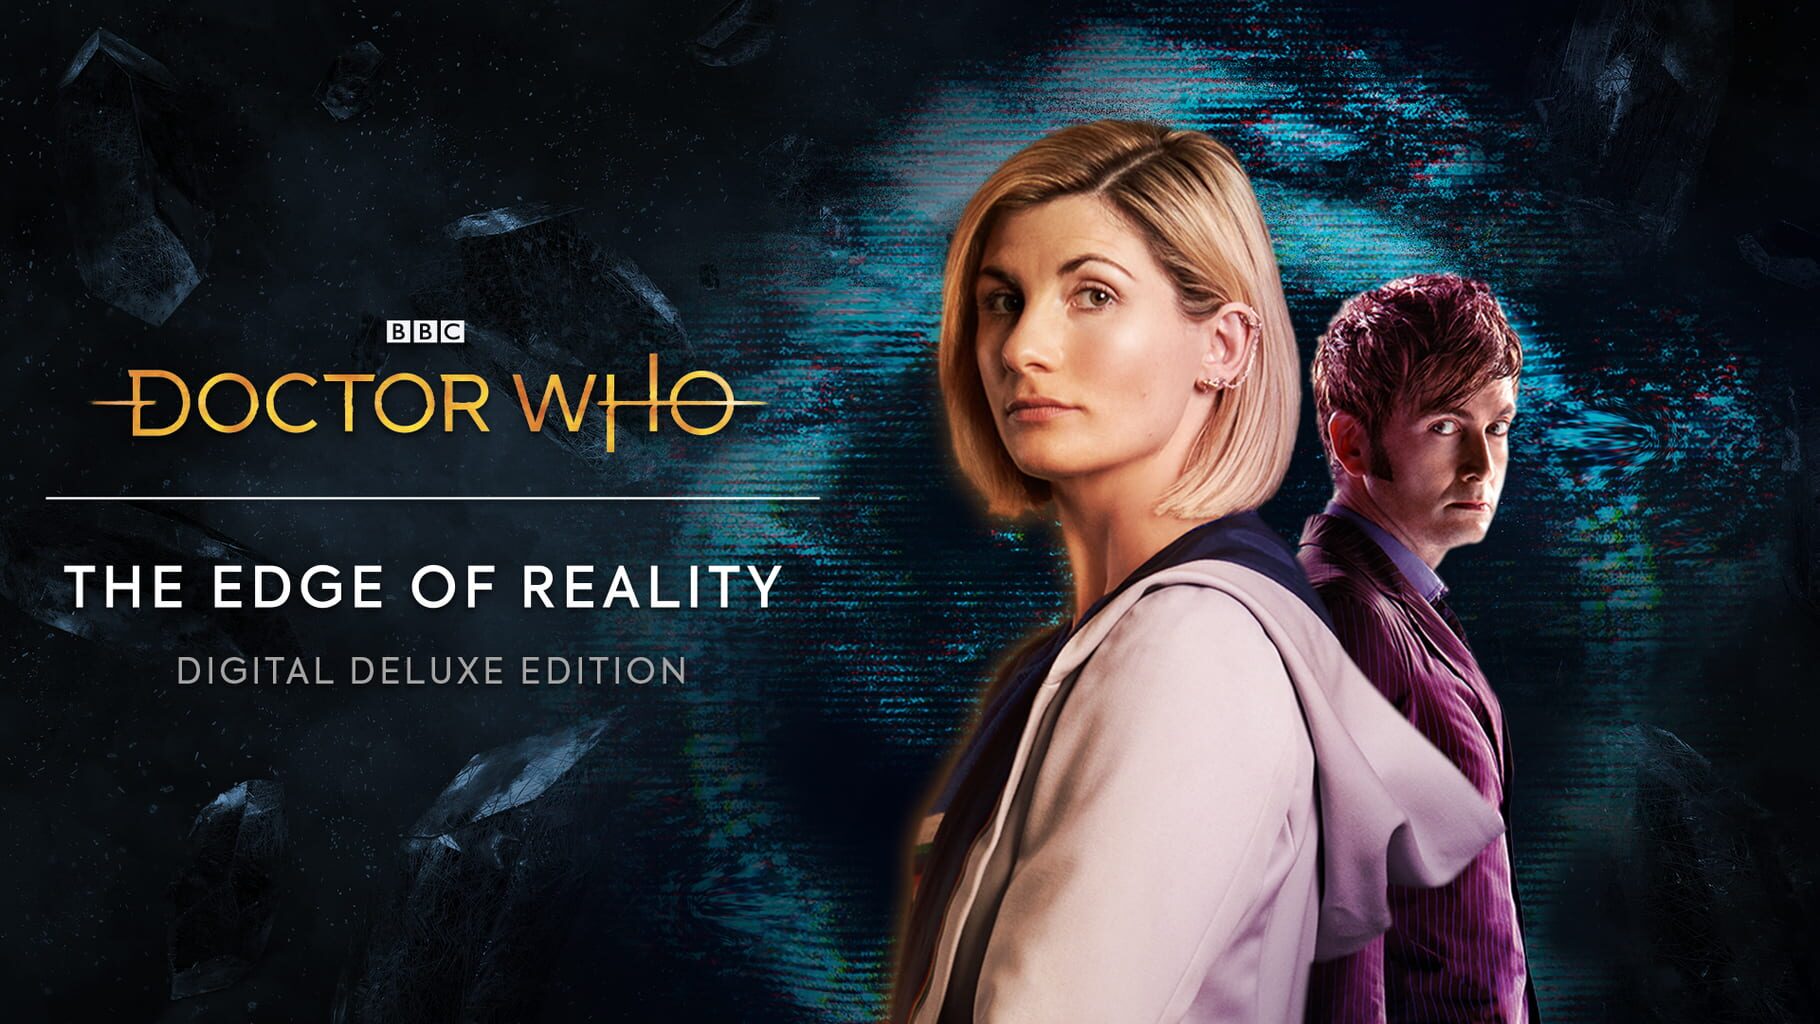 Doctor Who: The Edge of Reality - Digital Deluxe Edition artwork